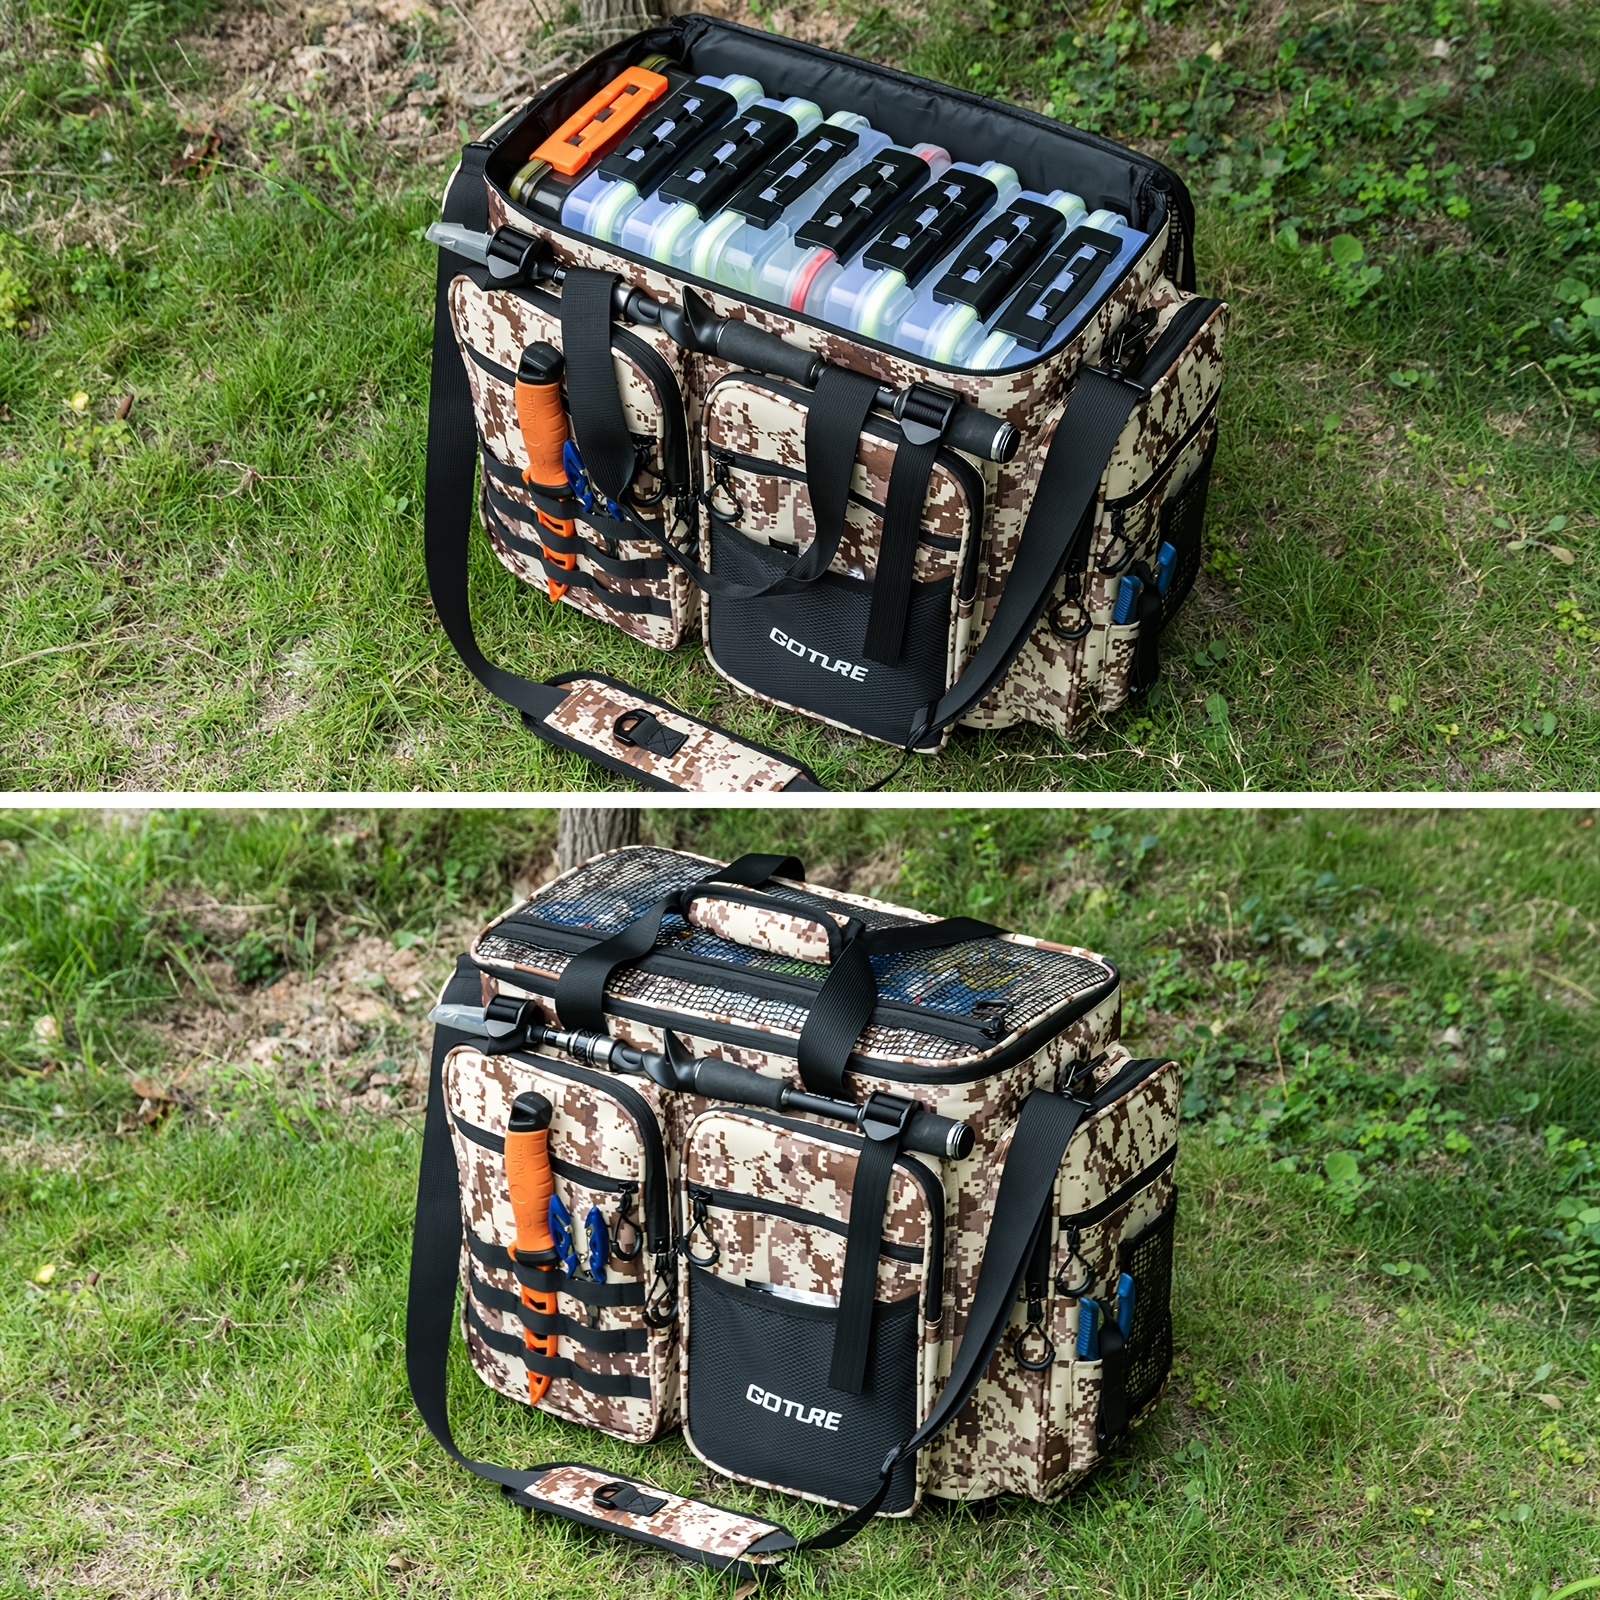  Goture Large Tackle Bag,Store Up to 8PCS 3700 Plus 4PCS 3600  Tackle Trays,Water Resistant Large Tackle Bag,Saltwater Fishing Gear Bag,Big  Fishing Bag,Removable Dividers(20.8x15.2x11.4)-Camo : Sports & Outdoors